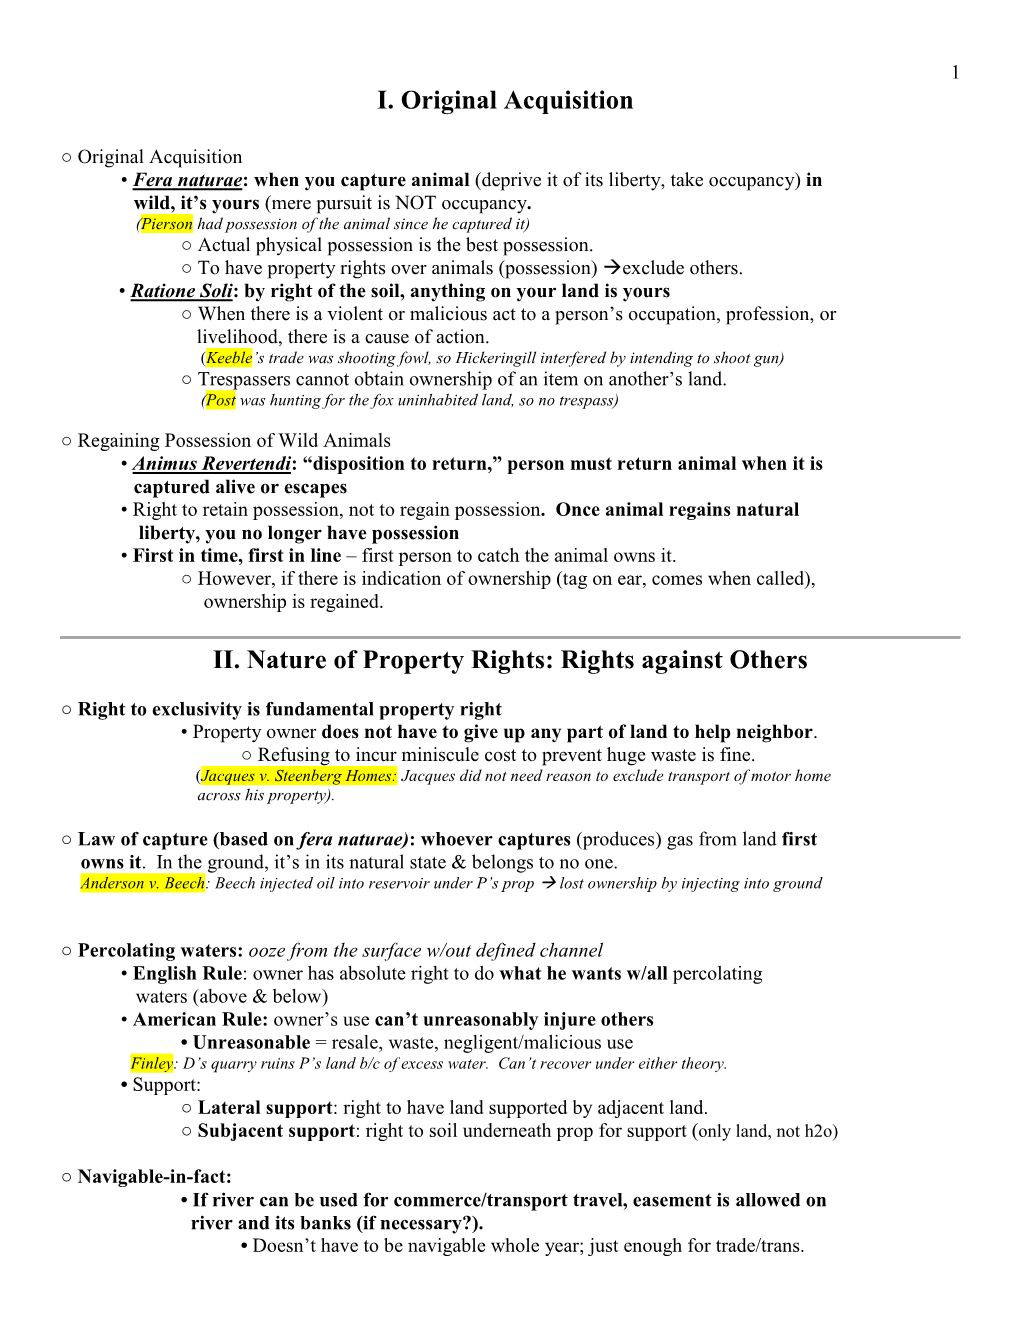 I. Original Acquisition II. Nature of Property Rights: Rights Against Others